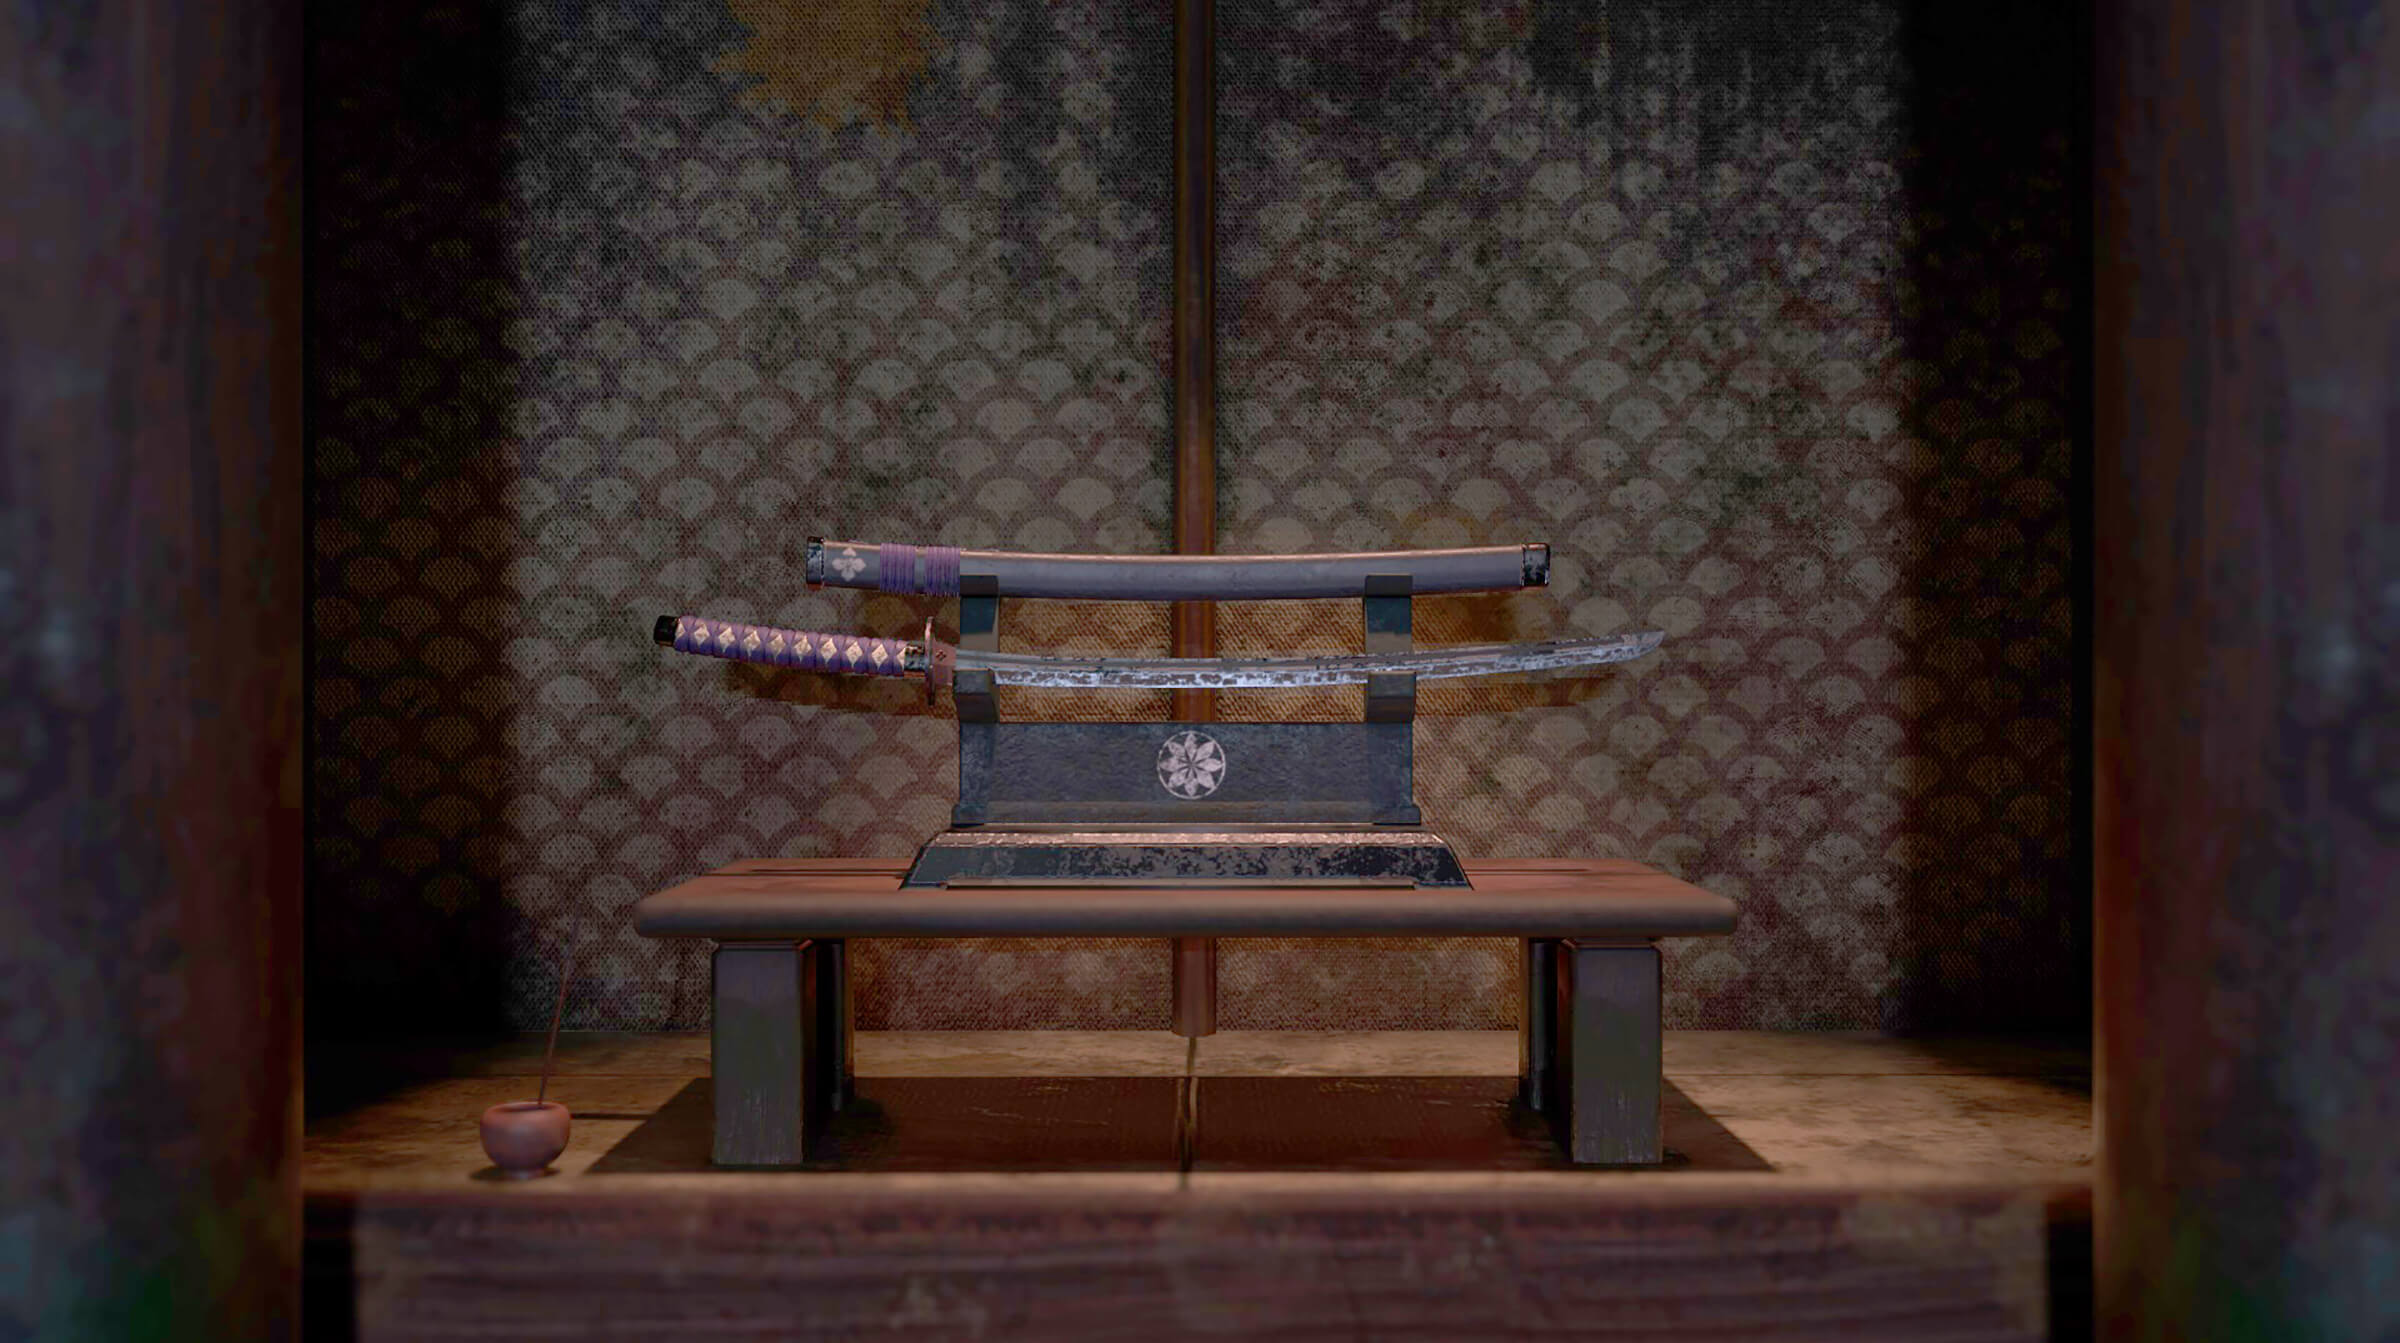 Ancient sword presented on a bench in an alcove